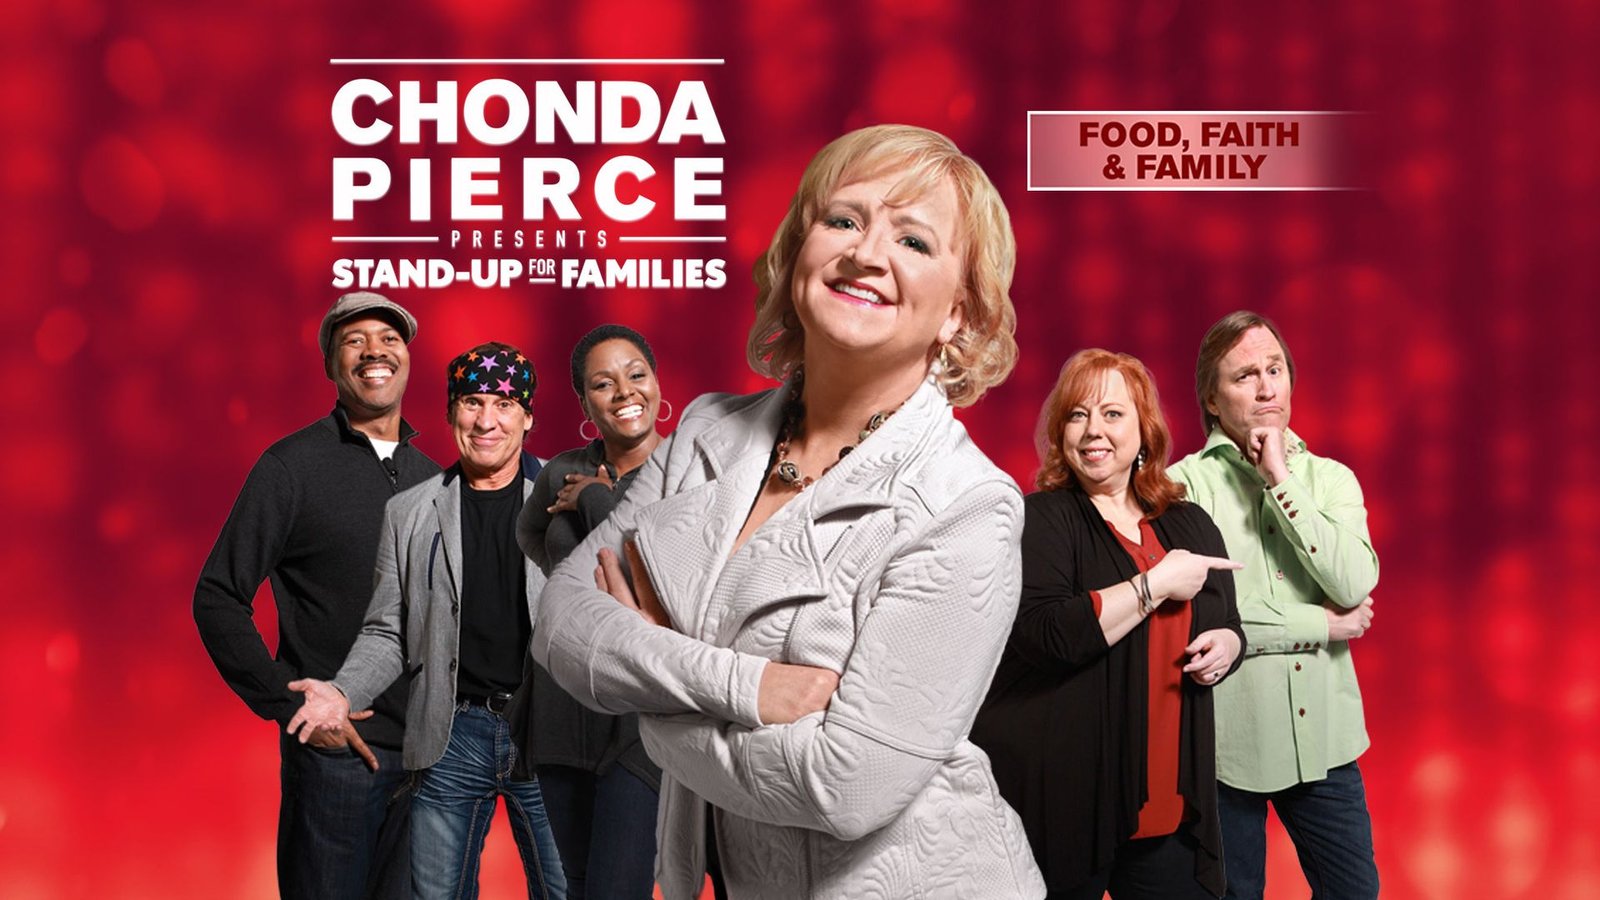 Chonda Pierce Presents: Stand Up for Families - Food, Faith & Family